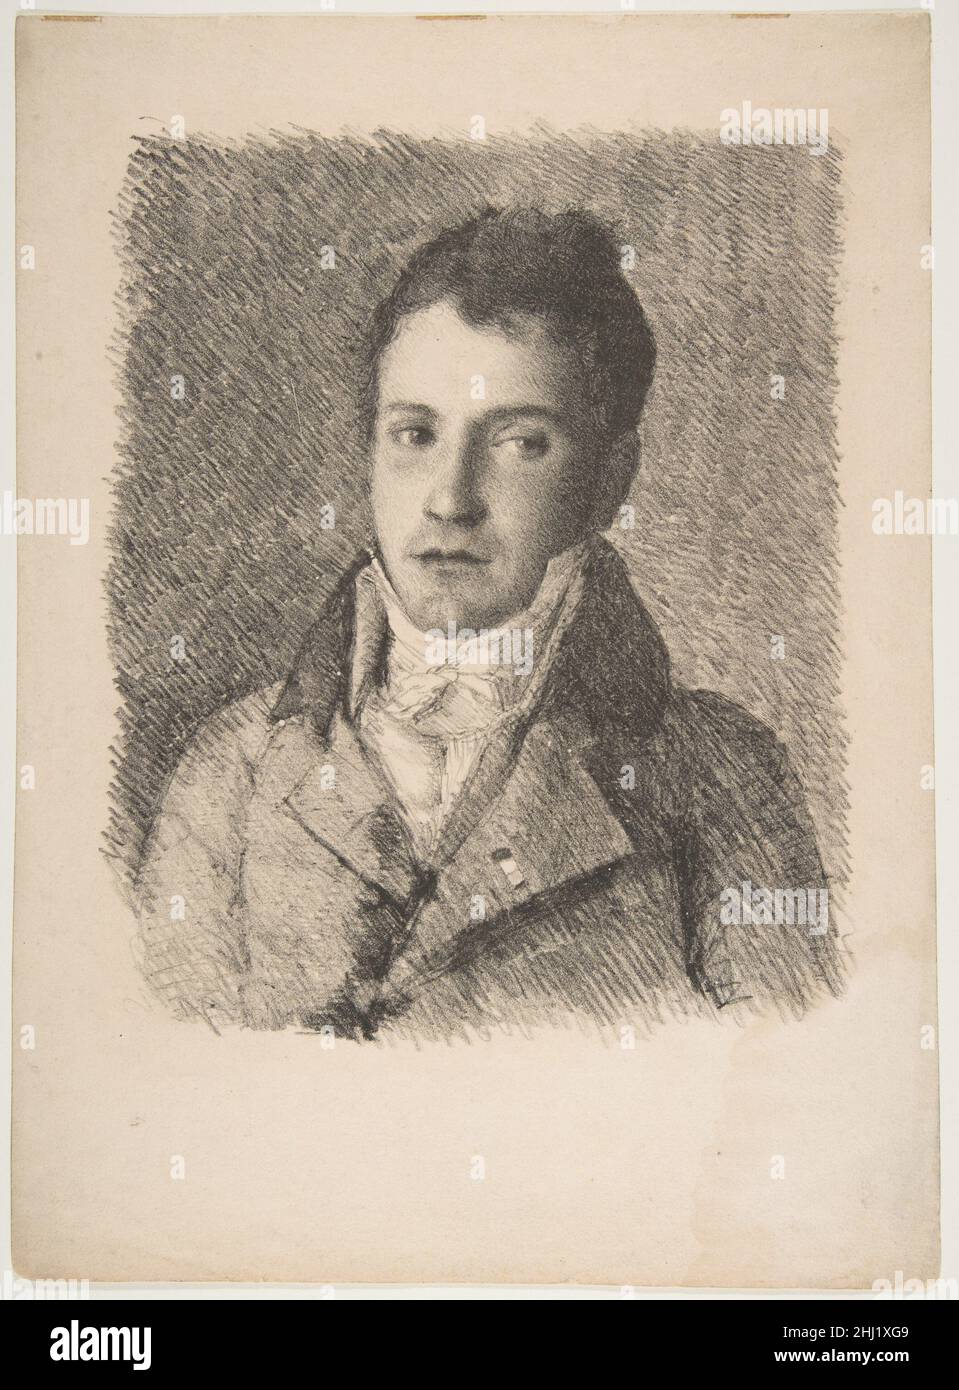 Portrait of a Young Man ca. 1820 Goya (Francisco de Goya y Lucientes) Spanish Because of its similarity in style and format to Goya's portrait of his lithography printer, Gaulon, this work was once thought to be his portrait of Gaulon's son. Only two impressions of the print are known. This impression was once owned by Frédéric Villot, a close friend of Delacroix and curator of paintings at the Musée du Louvre during the 1850's. The other example, now in the British Museum, belonged to the Parisian art critic and fine print collector Philippe Burty (1830-1890), who owned several of the prints Stock Photo